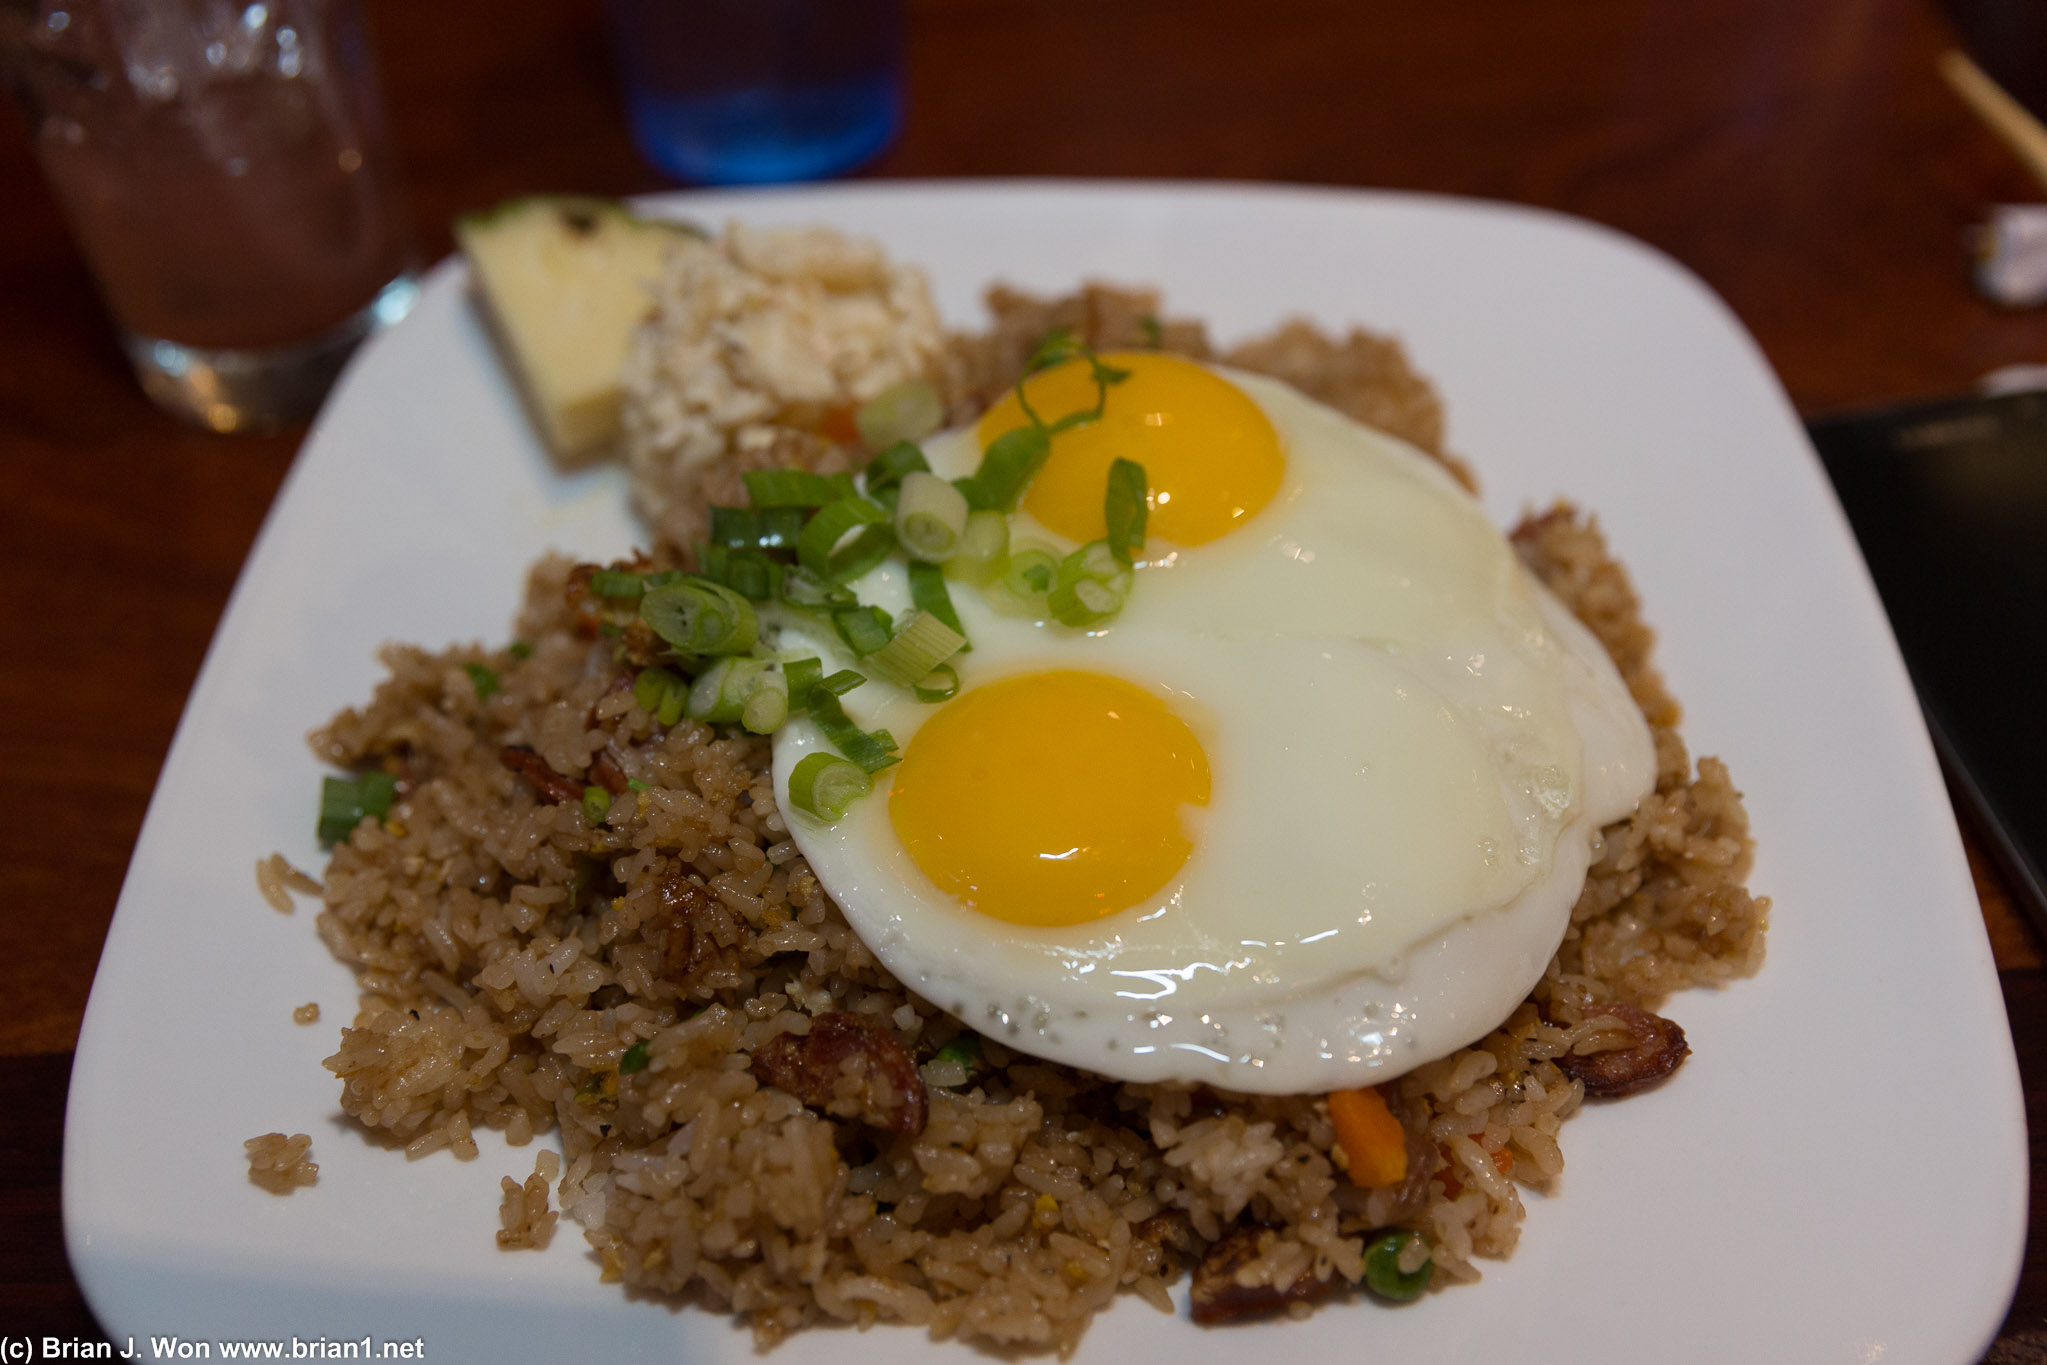 Fried rice. Portugese sausage with added sunny side up eggs.